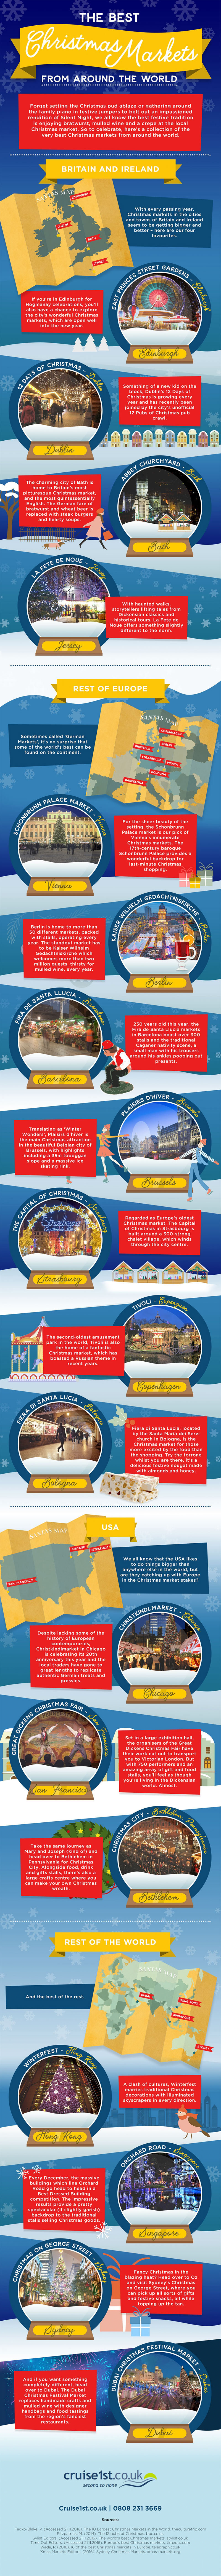 Christmas markets infographic